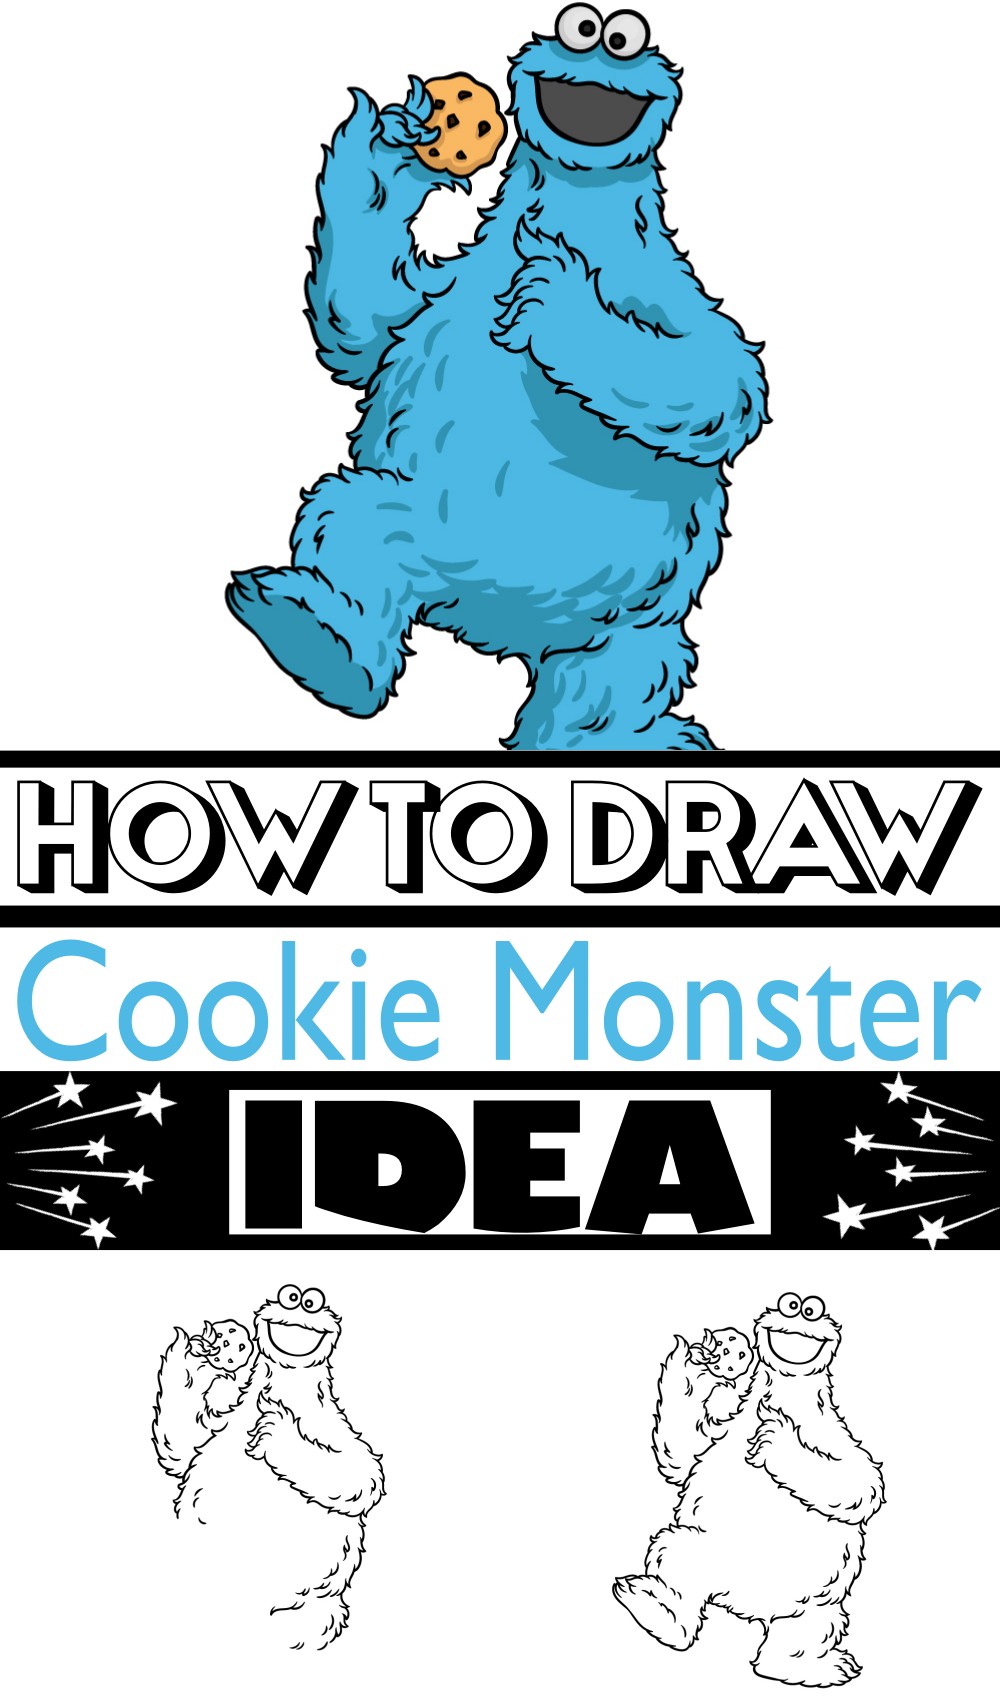 How To Draw Cookie Monster